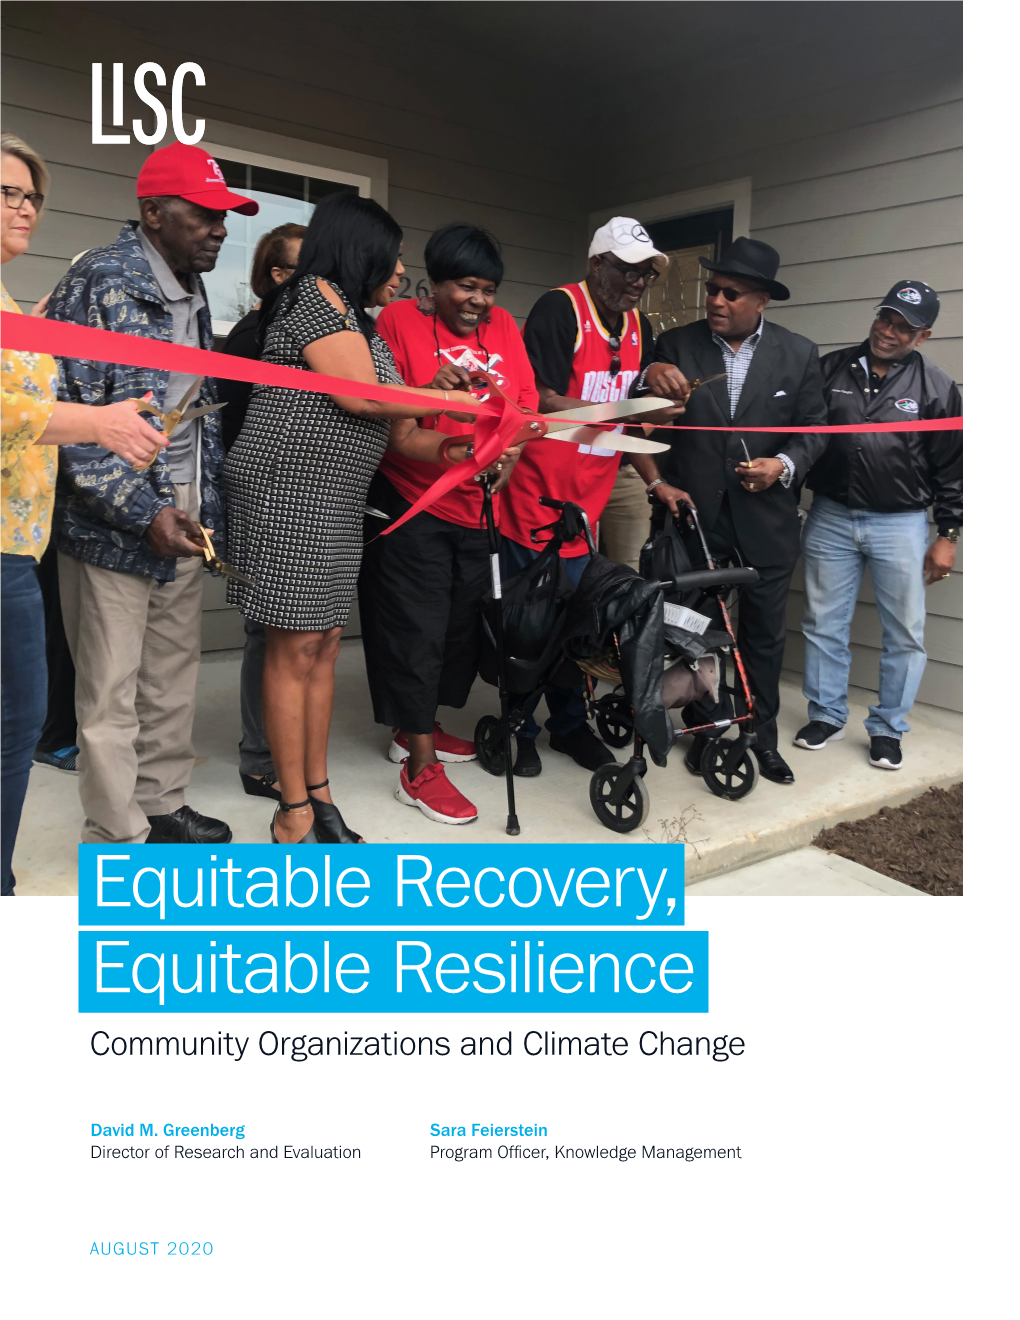 Equitable Recovery, Equitable Resilience Community Organizations and Climate Change